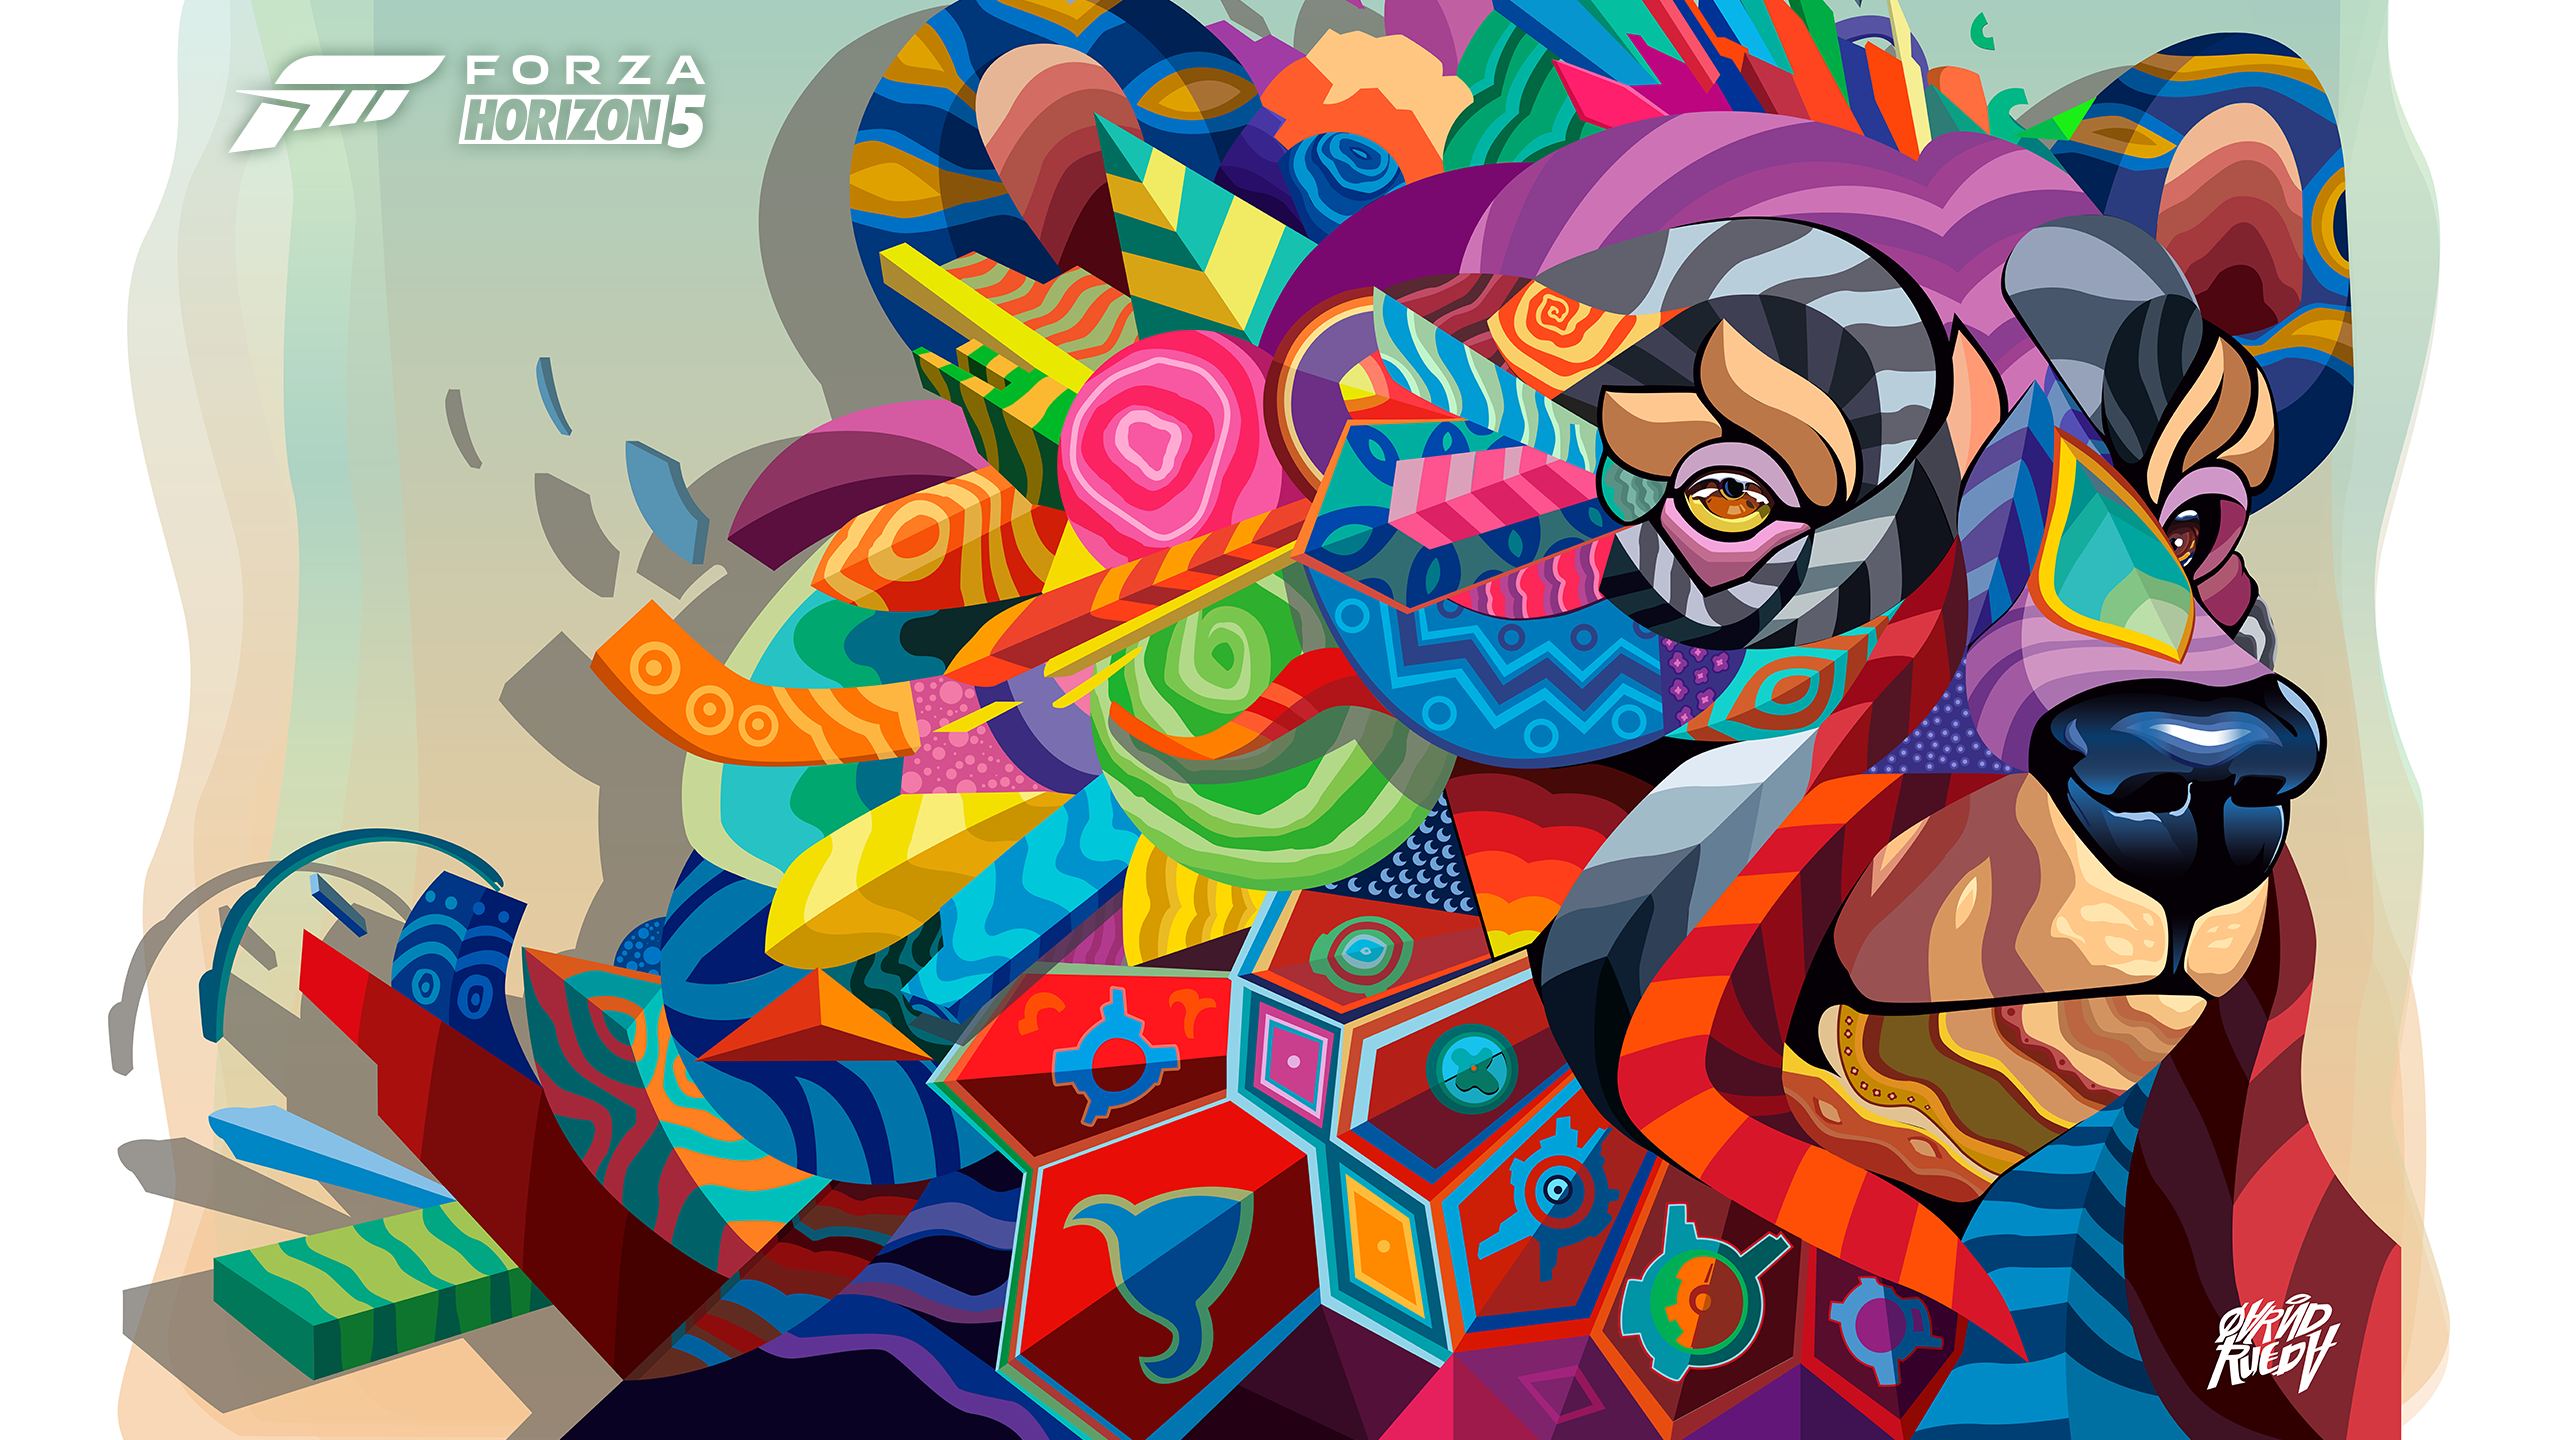 Colorful abstract bear illustration HD wallpaper for Forza Horizon 5 desktop background.